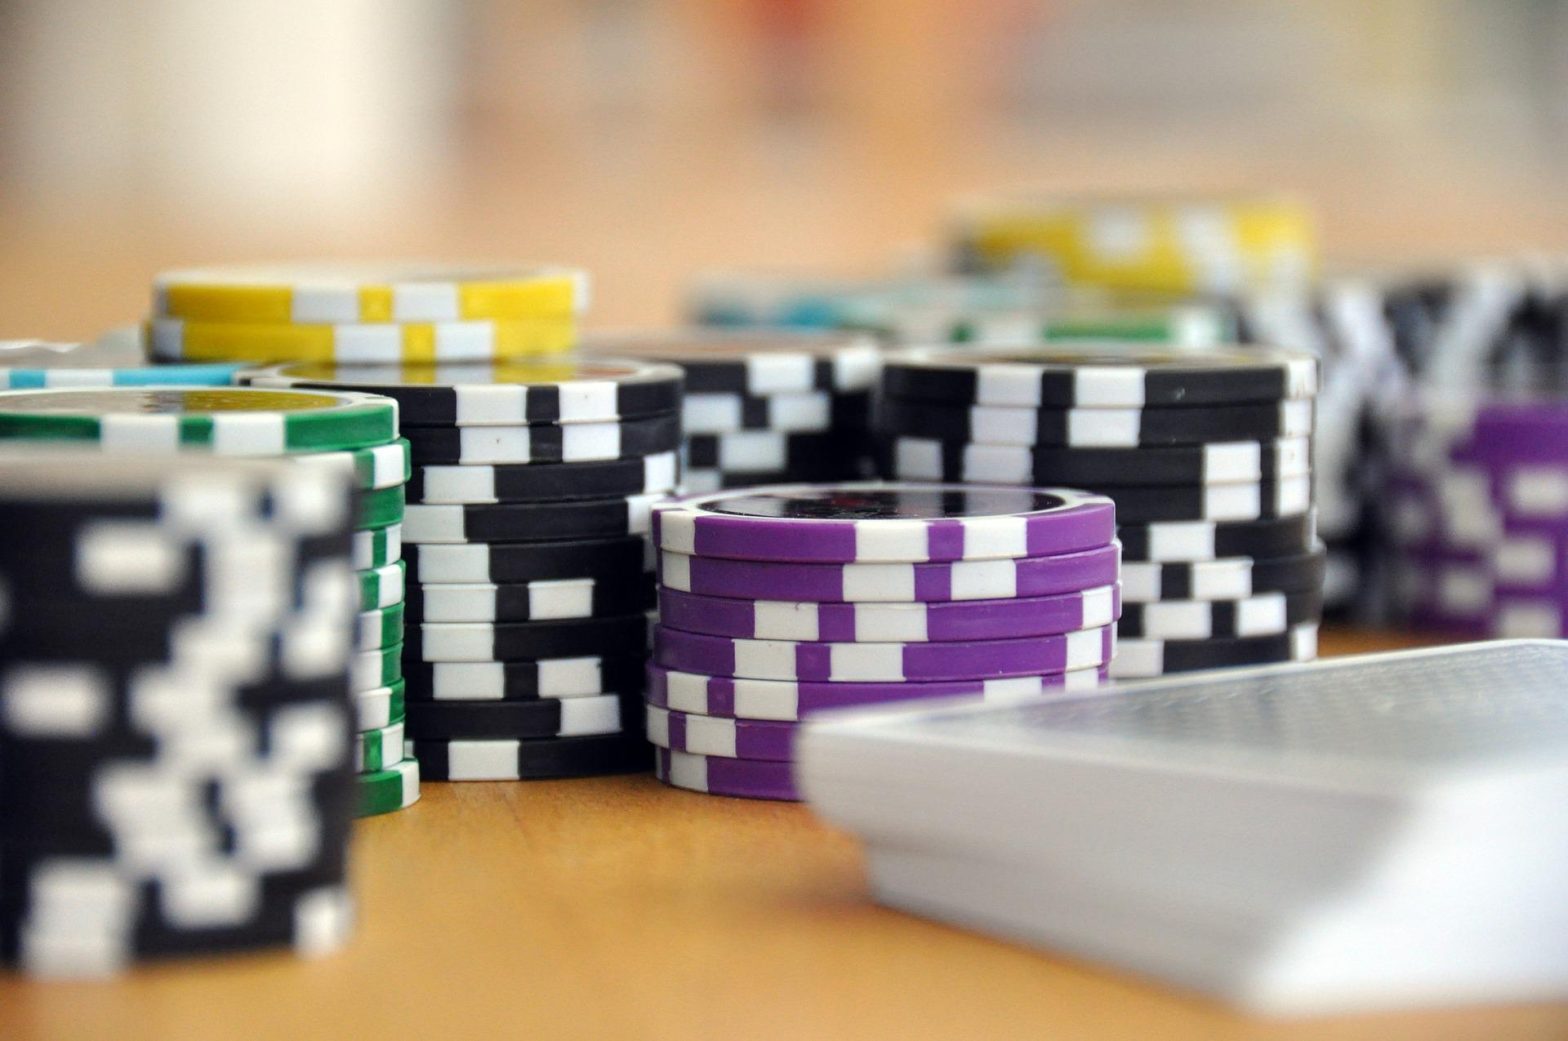 Play blackjack online at the casino